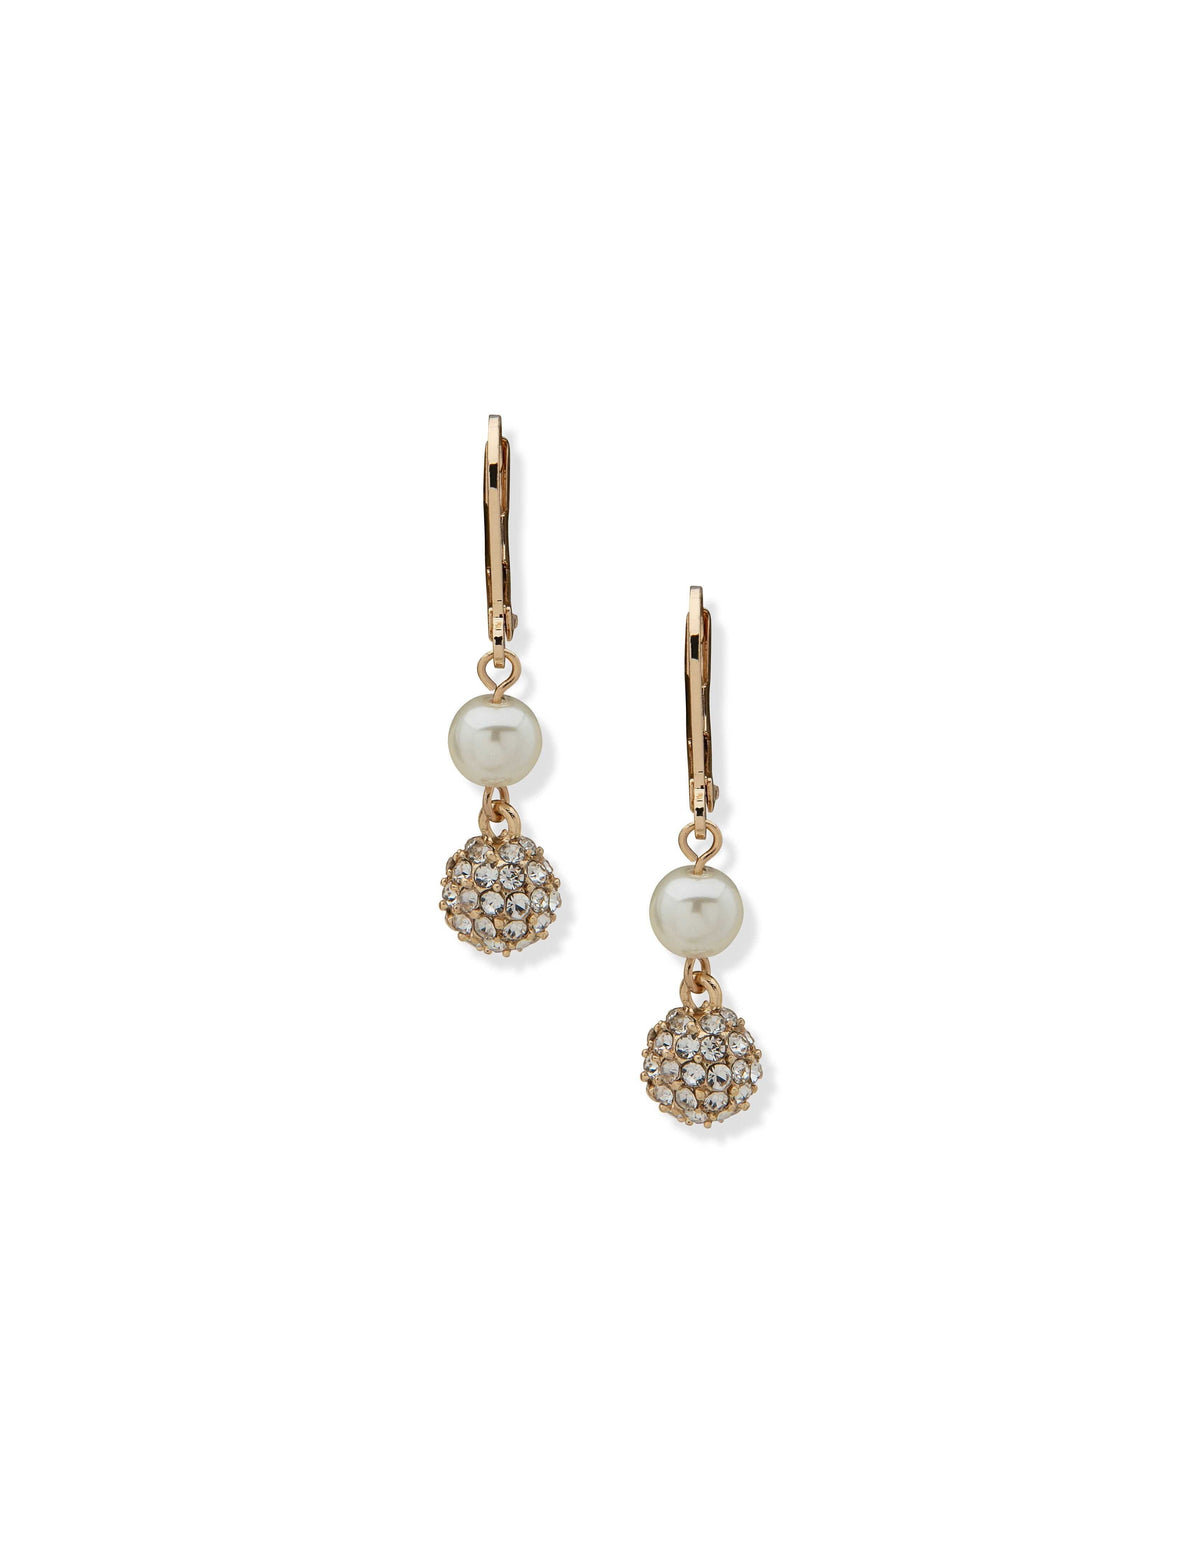 Faux Pearl and Crystal Ball Drop Earrings